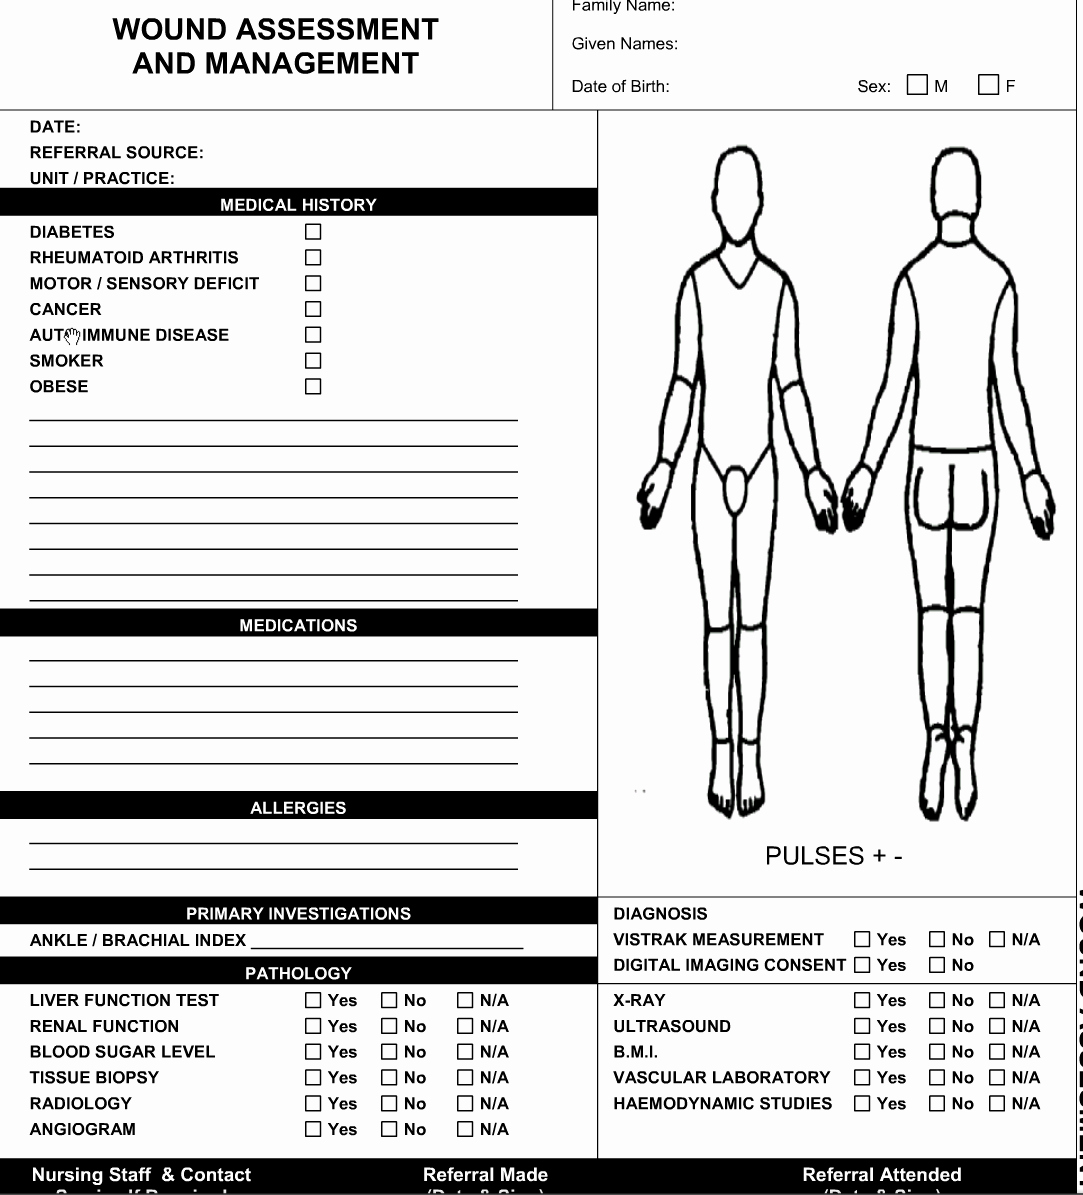 Nursing assessment Documentation Template Lovely Body Diagram for Documenting Wounds Anatomy